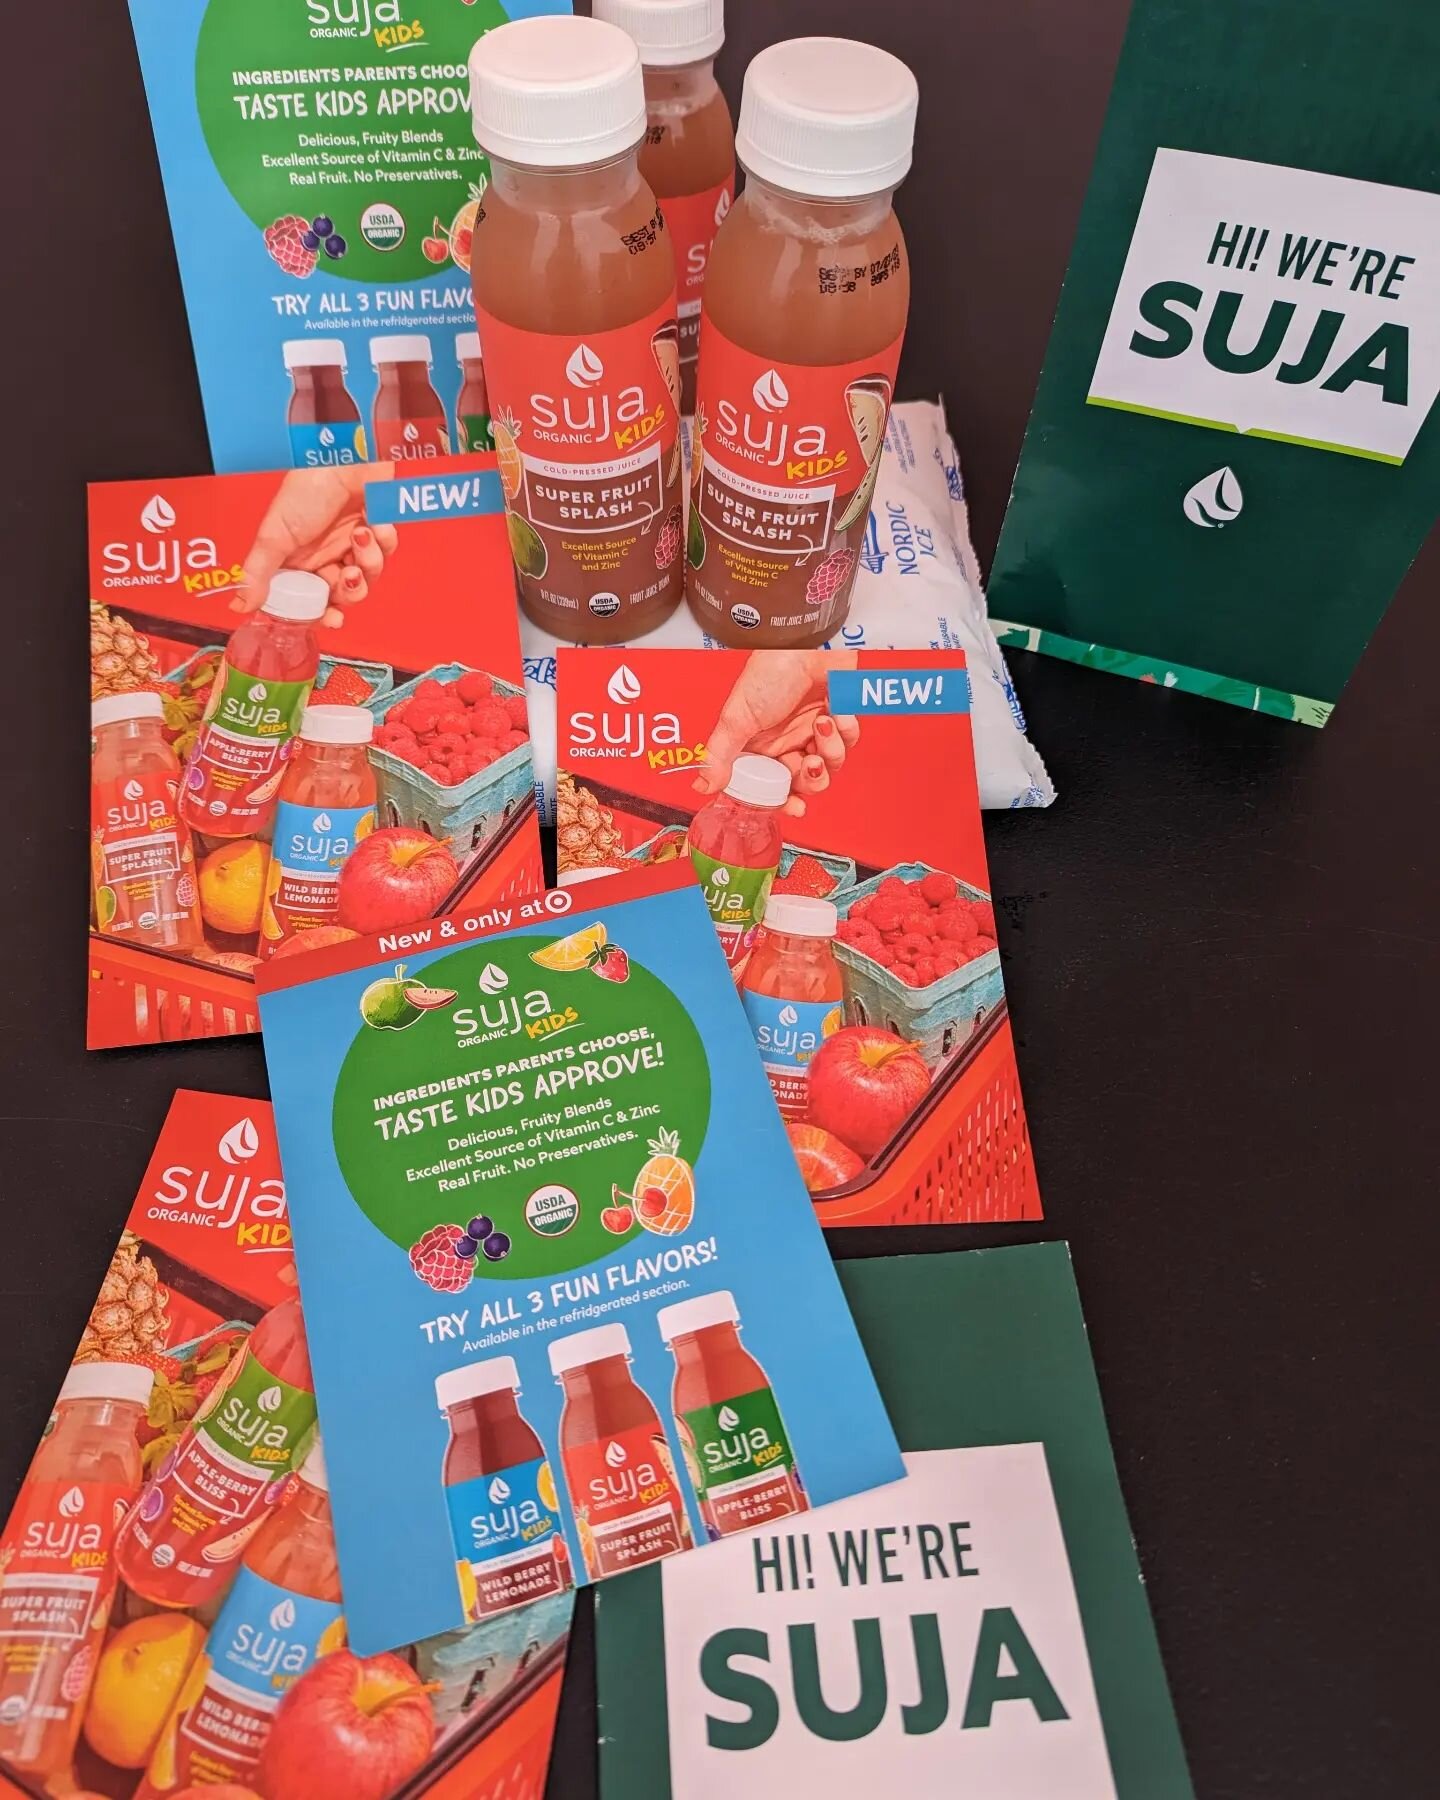 Thank you SUJA Organic for being a sponsor of the Jefferson Spring Carnival ❤️

@lovesuja